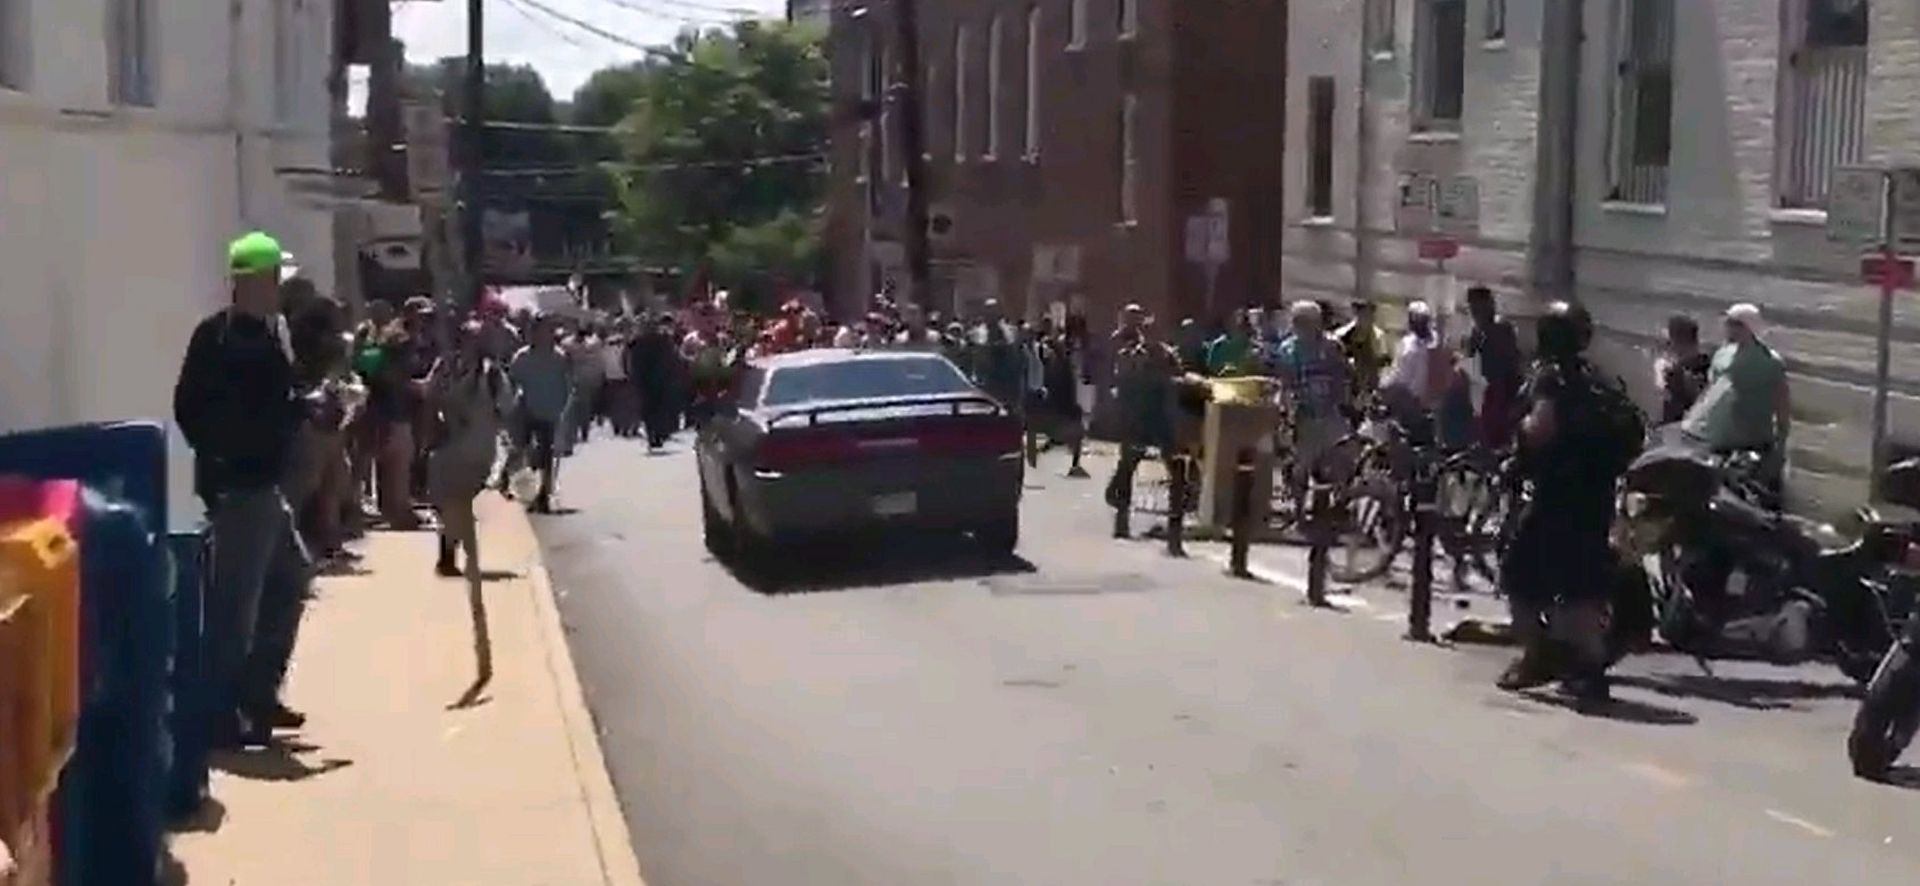 epa06140859 A video grab made available by Brennan Gilmore? shows a car hitting a crowd in Charlottesville, Virginia, USA, 12 August 2017. According to media reports at least one person was killed after a car hit a crowd of people counter-protesting the 'Unite the Right' rally which was scheduled to take place in Charlottesville on 12 August.  EPA/BRENNAN GILMORE / HANDOUT  HANDOUT EDITORIAL USE ONLY/NO SALES